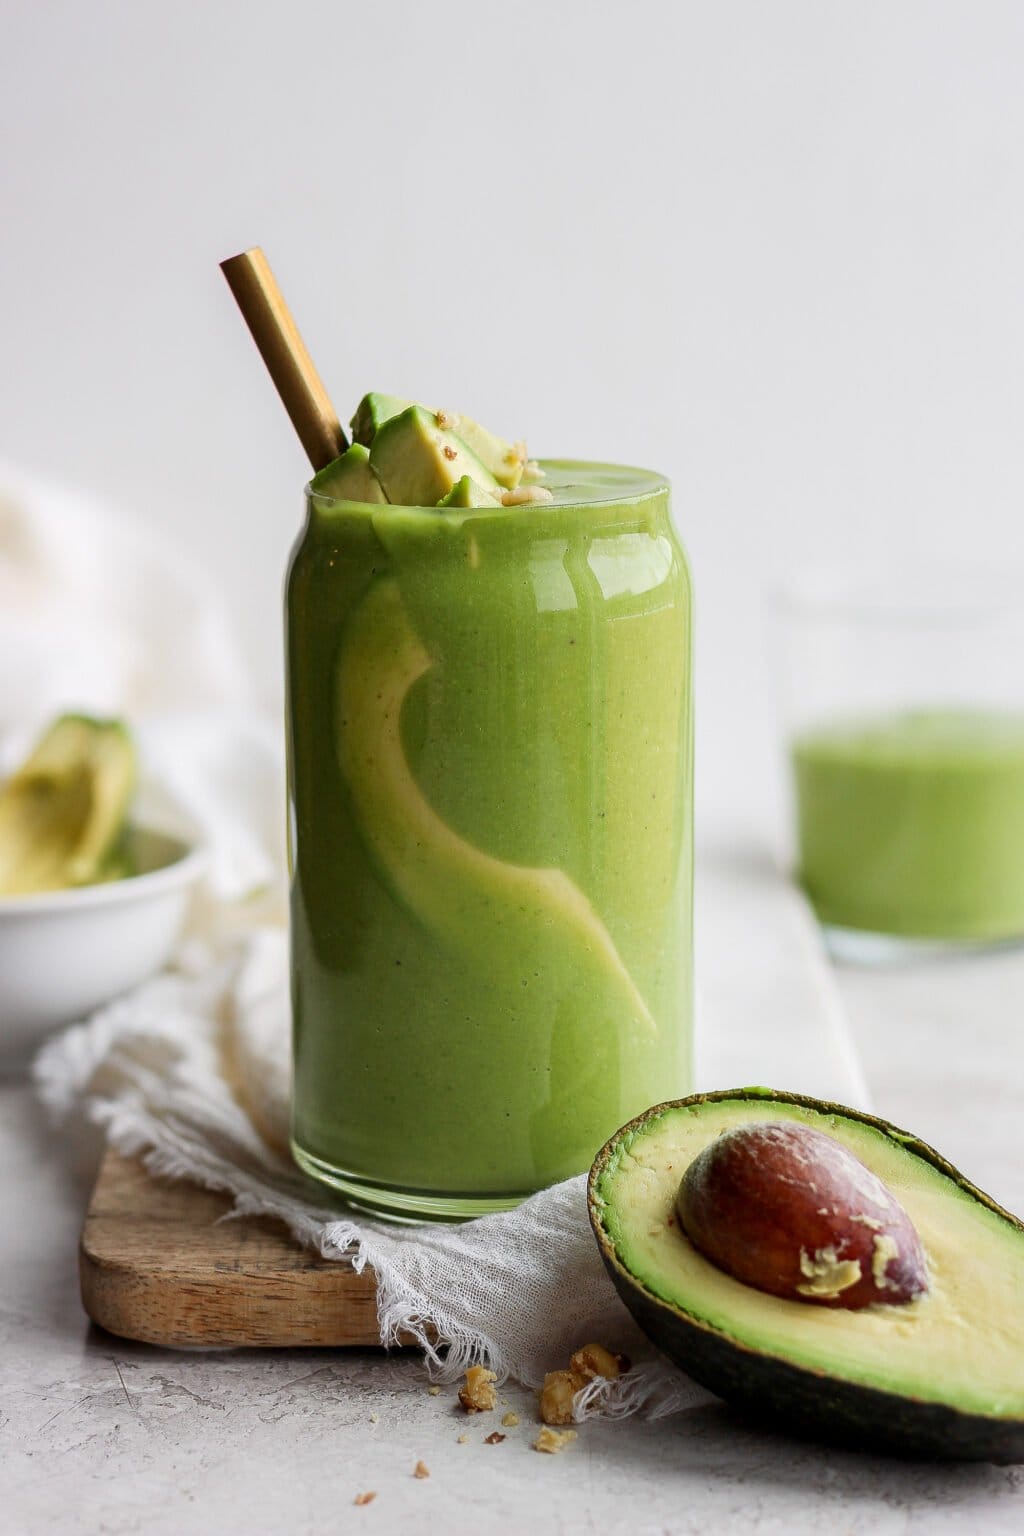 Delicious Avocado Smoothie 4 Ingredients Fit Foodie Finds 9556